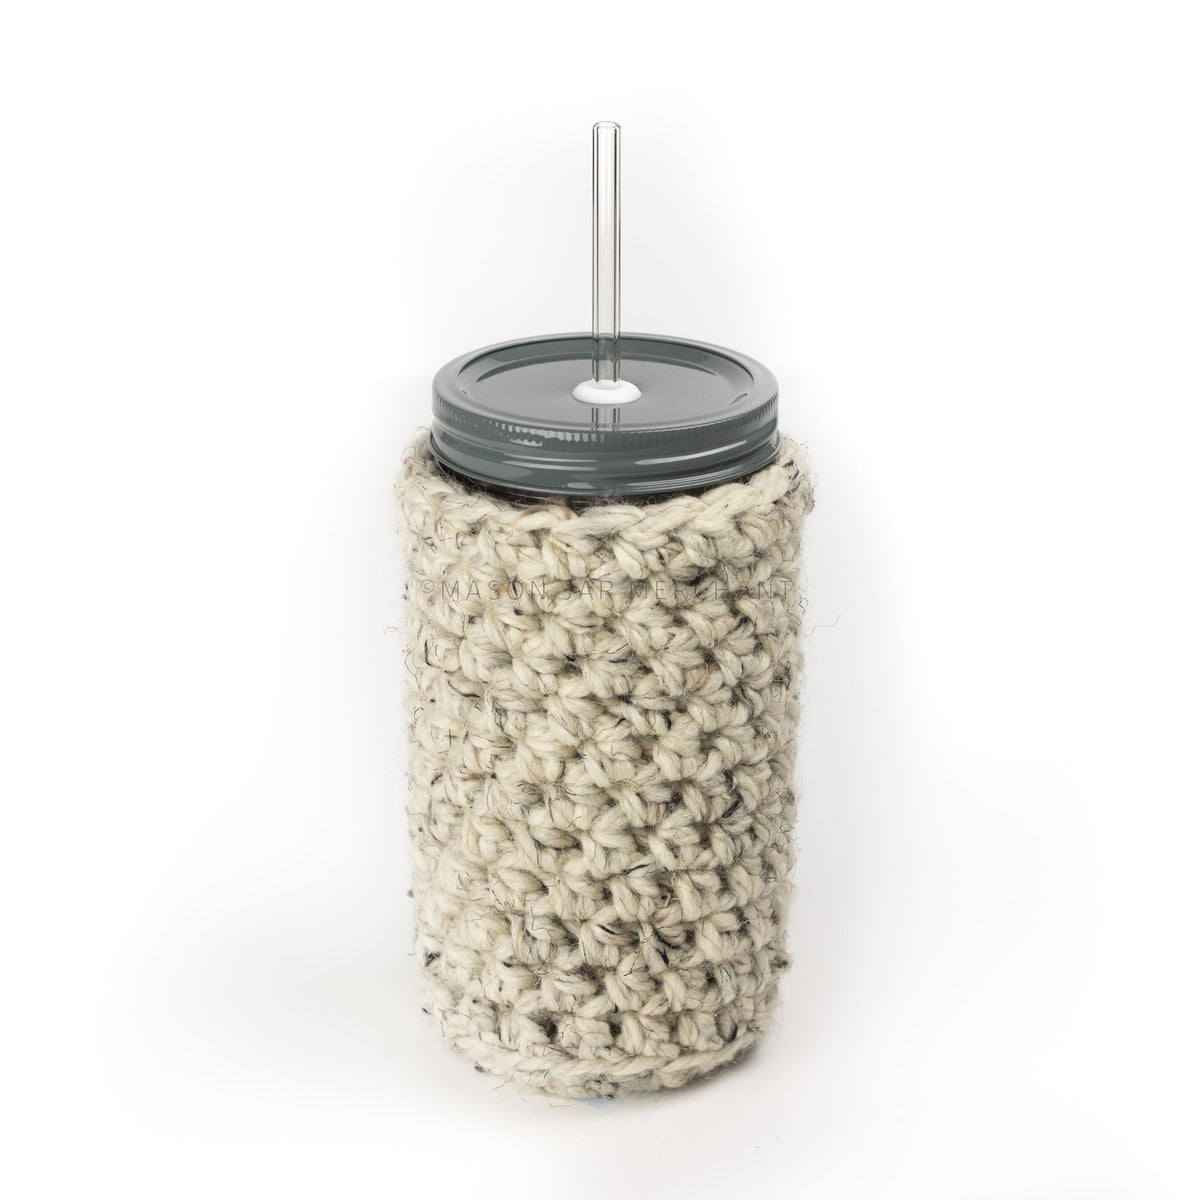 24 oz reusable glass mason jar tumbler with an all grey straw lid and a glass reusable straw. An off white knit cozy with flex of beige and black covers the jar